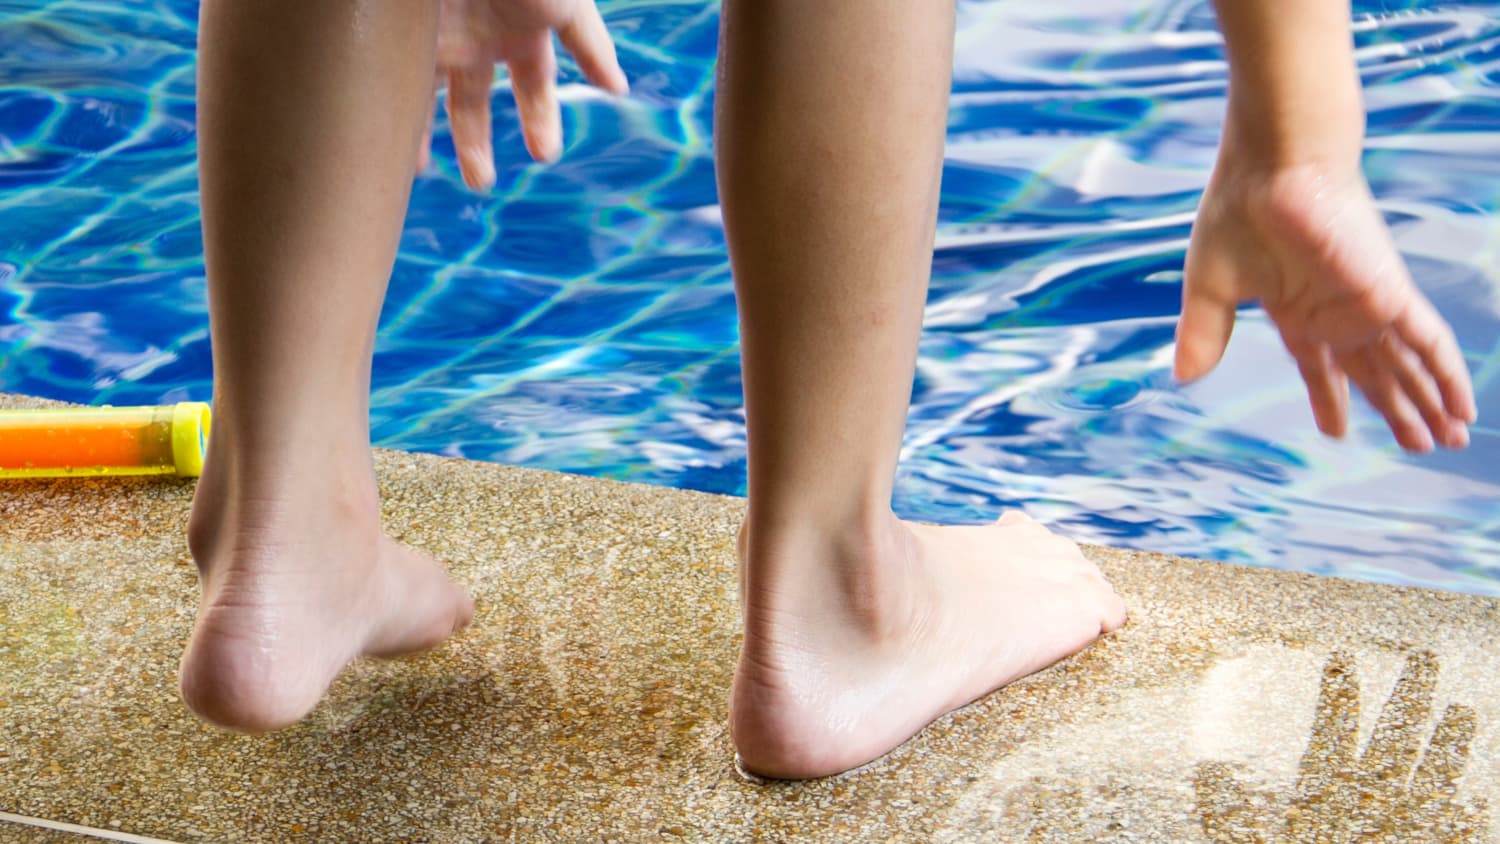 Child at a pool with his feet exposed, possibly leaving him open to harmless but contagious skin conditions.